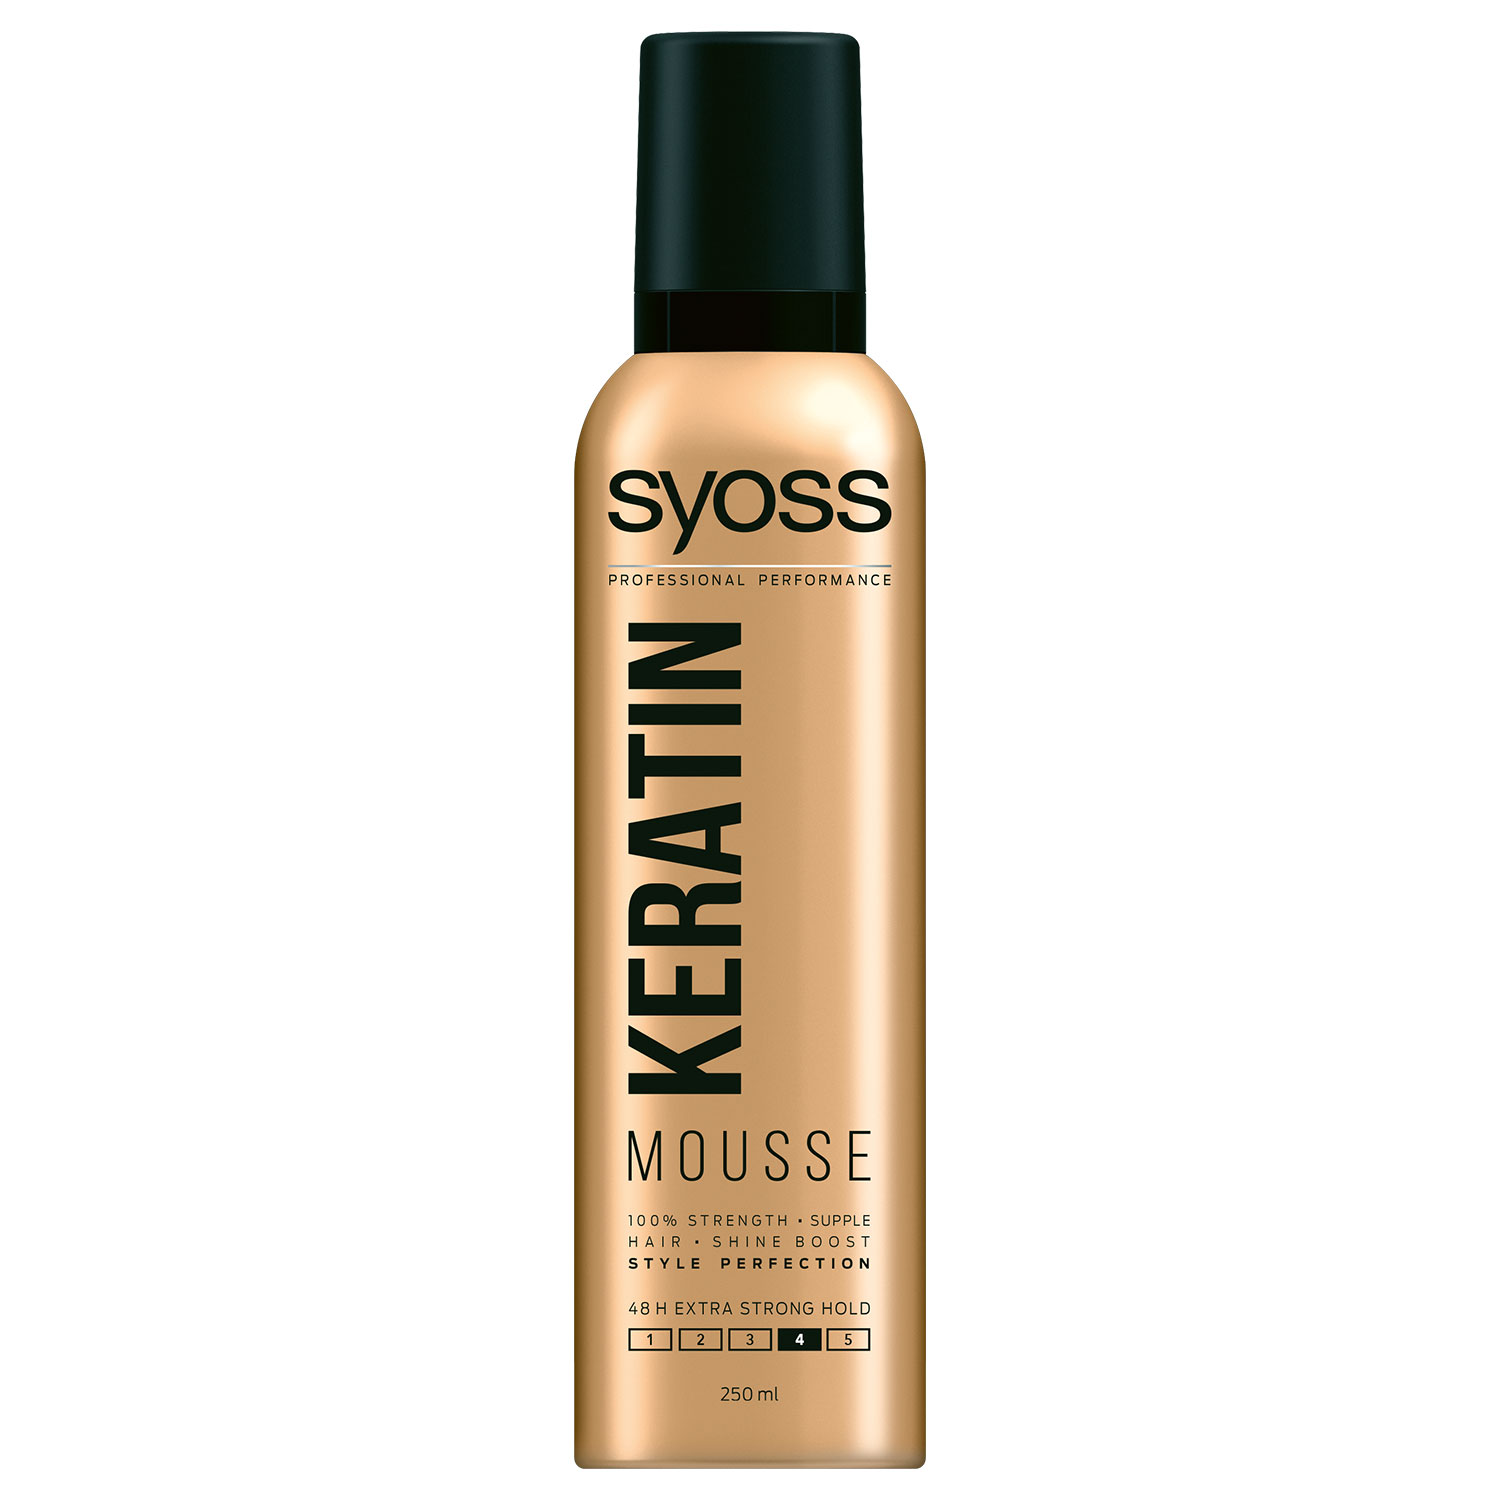 Mousse Syoss Salon Control System Keratin Perfection of the image for styling hair extra strong fixation 250ml